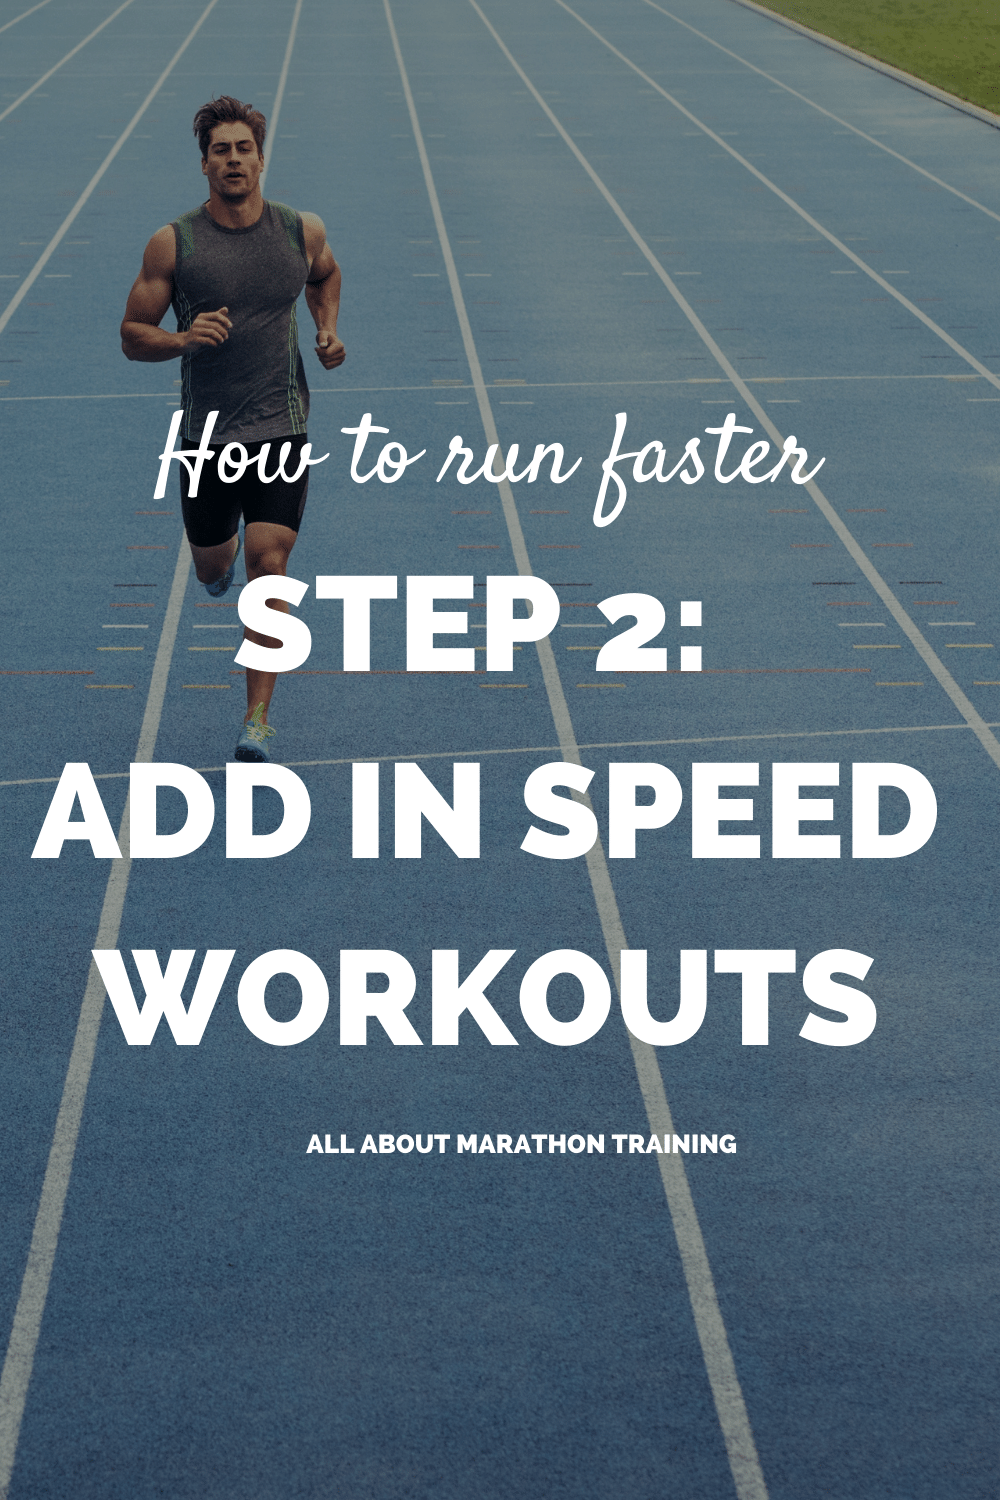 Why Marathoners Need to Build Their Sprint Speed